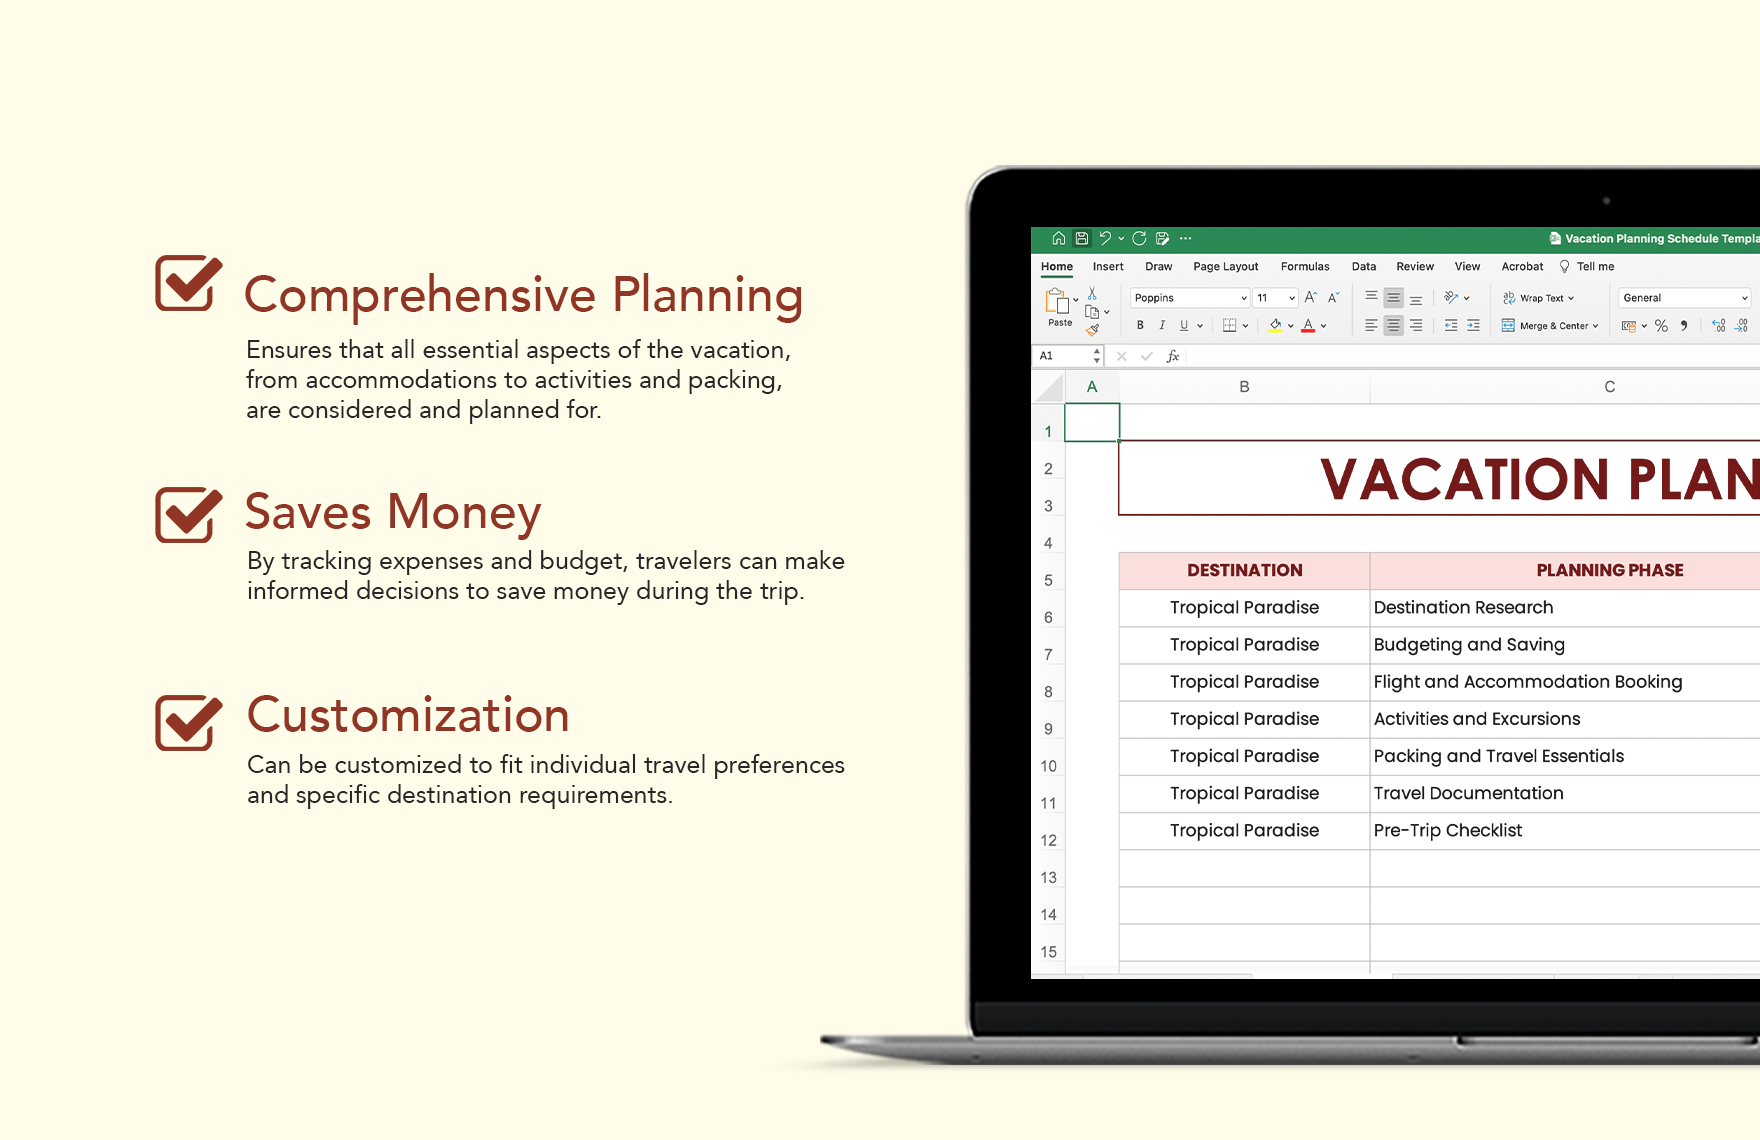 Vacation Planning Schedule Template